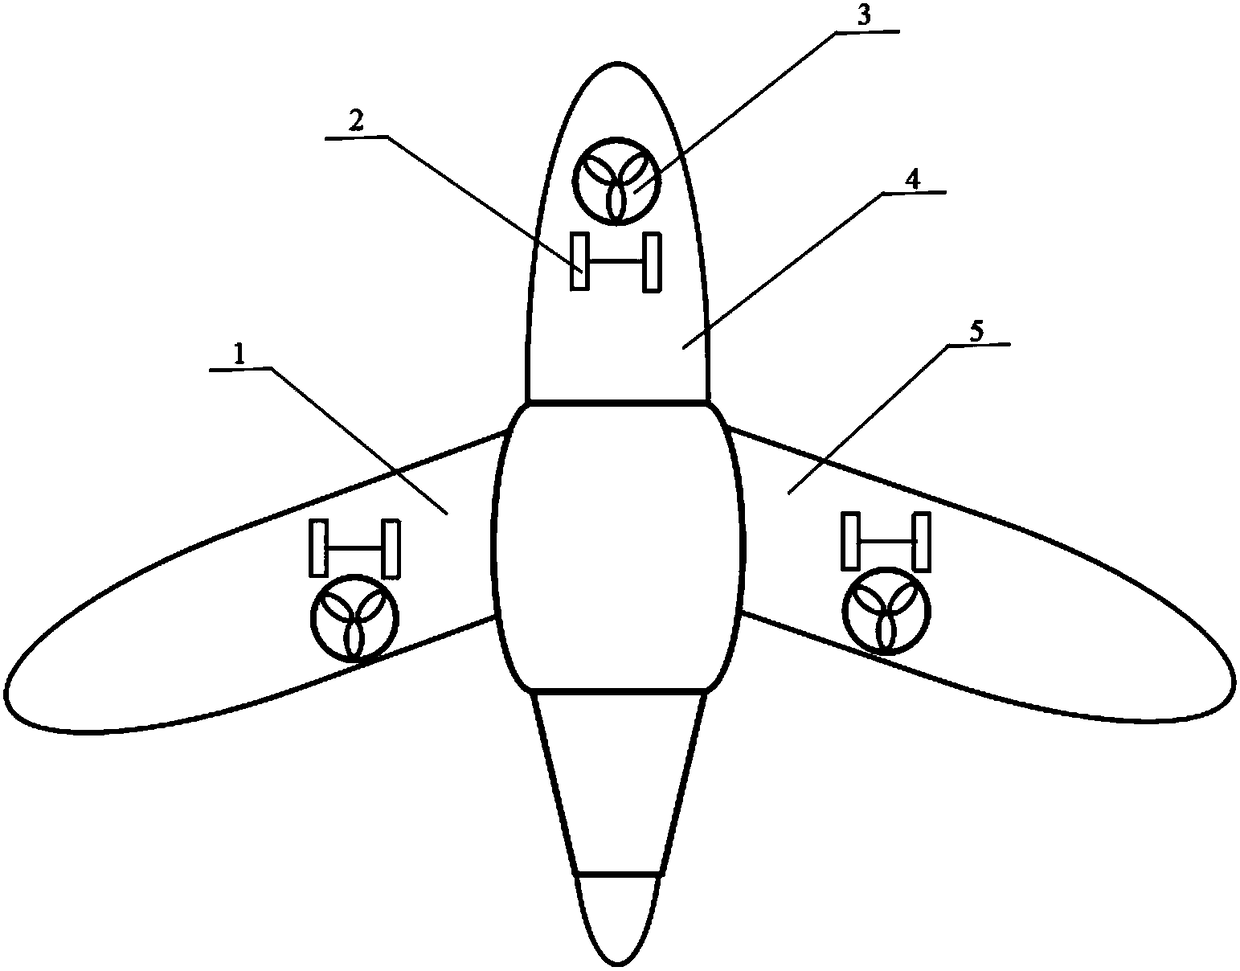 A new type of aircraft landing gear and landing method